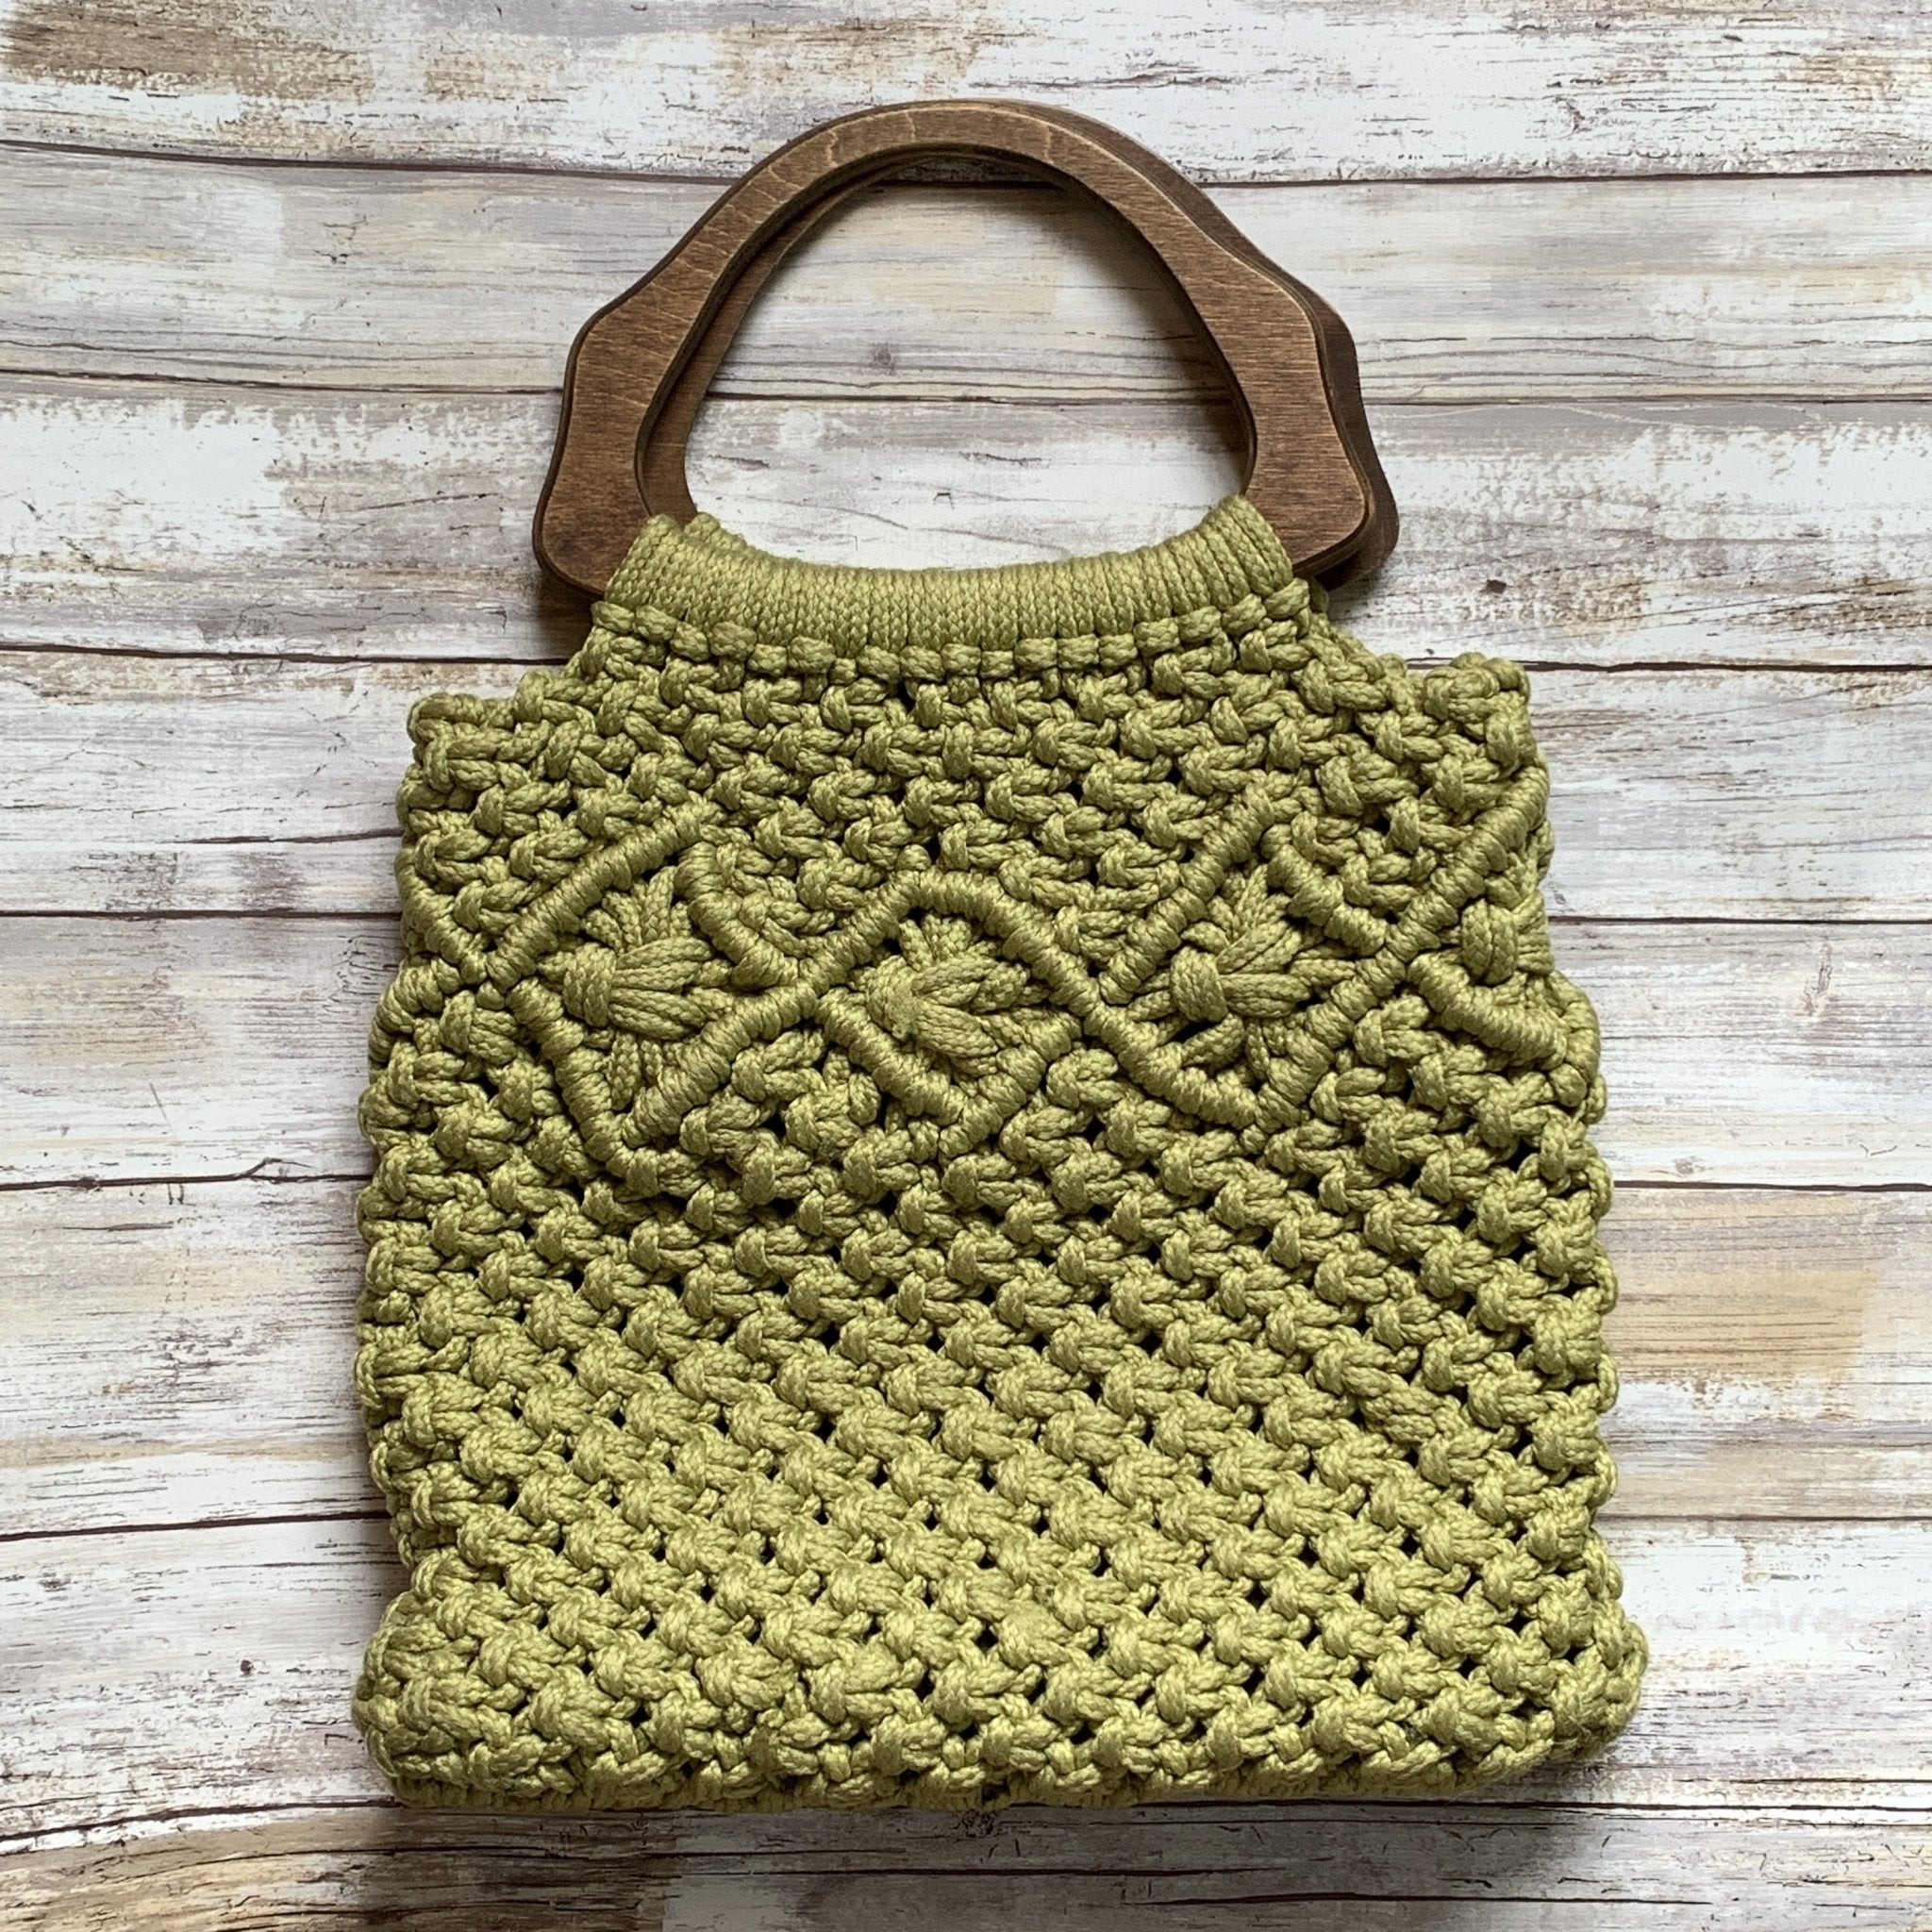 Coach Lori Mixed Leather Snakeskin Shoulder Bag Purse in Army Green, Army  Green: Amazon.co.uk: Fashion